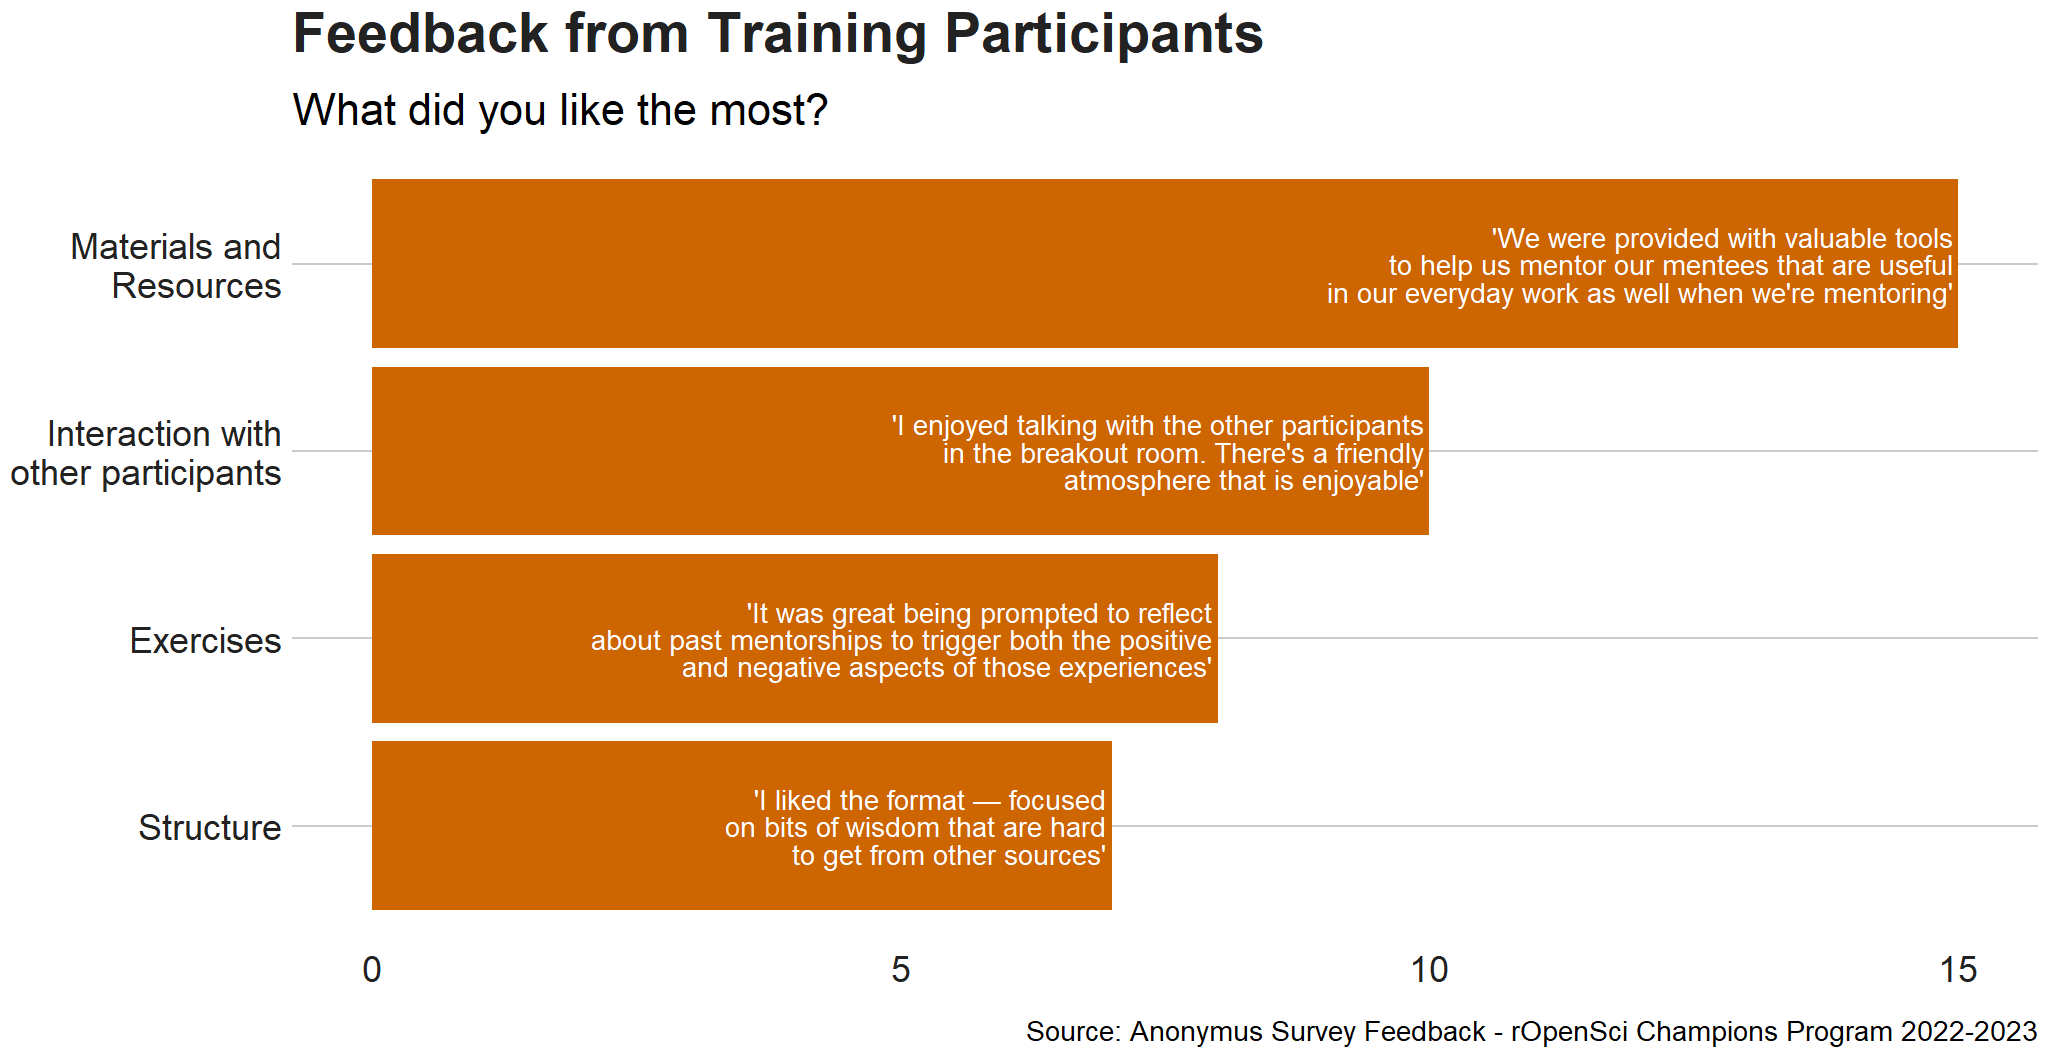 Ranked quantities of four different positive aspects in a bar plot. The aspects are Material and Resources (15 mentions), Interaction with other participants, (10 mentions), Exercises (8 mentions), and Structure (7 mentions). Each aspect is followed by a comment explaining why it was perceived positively by the participants.